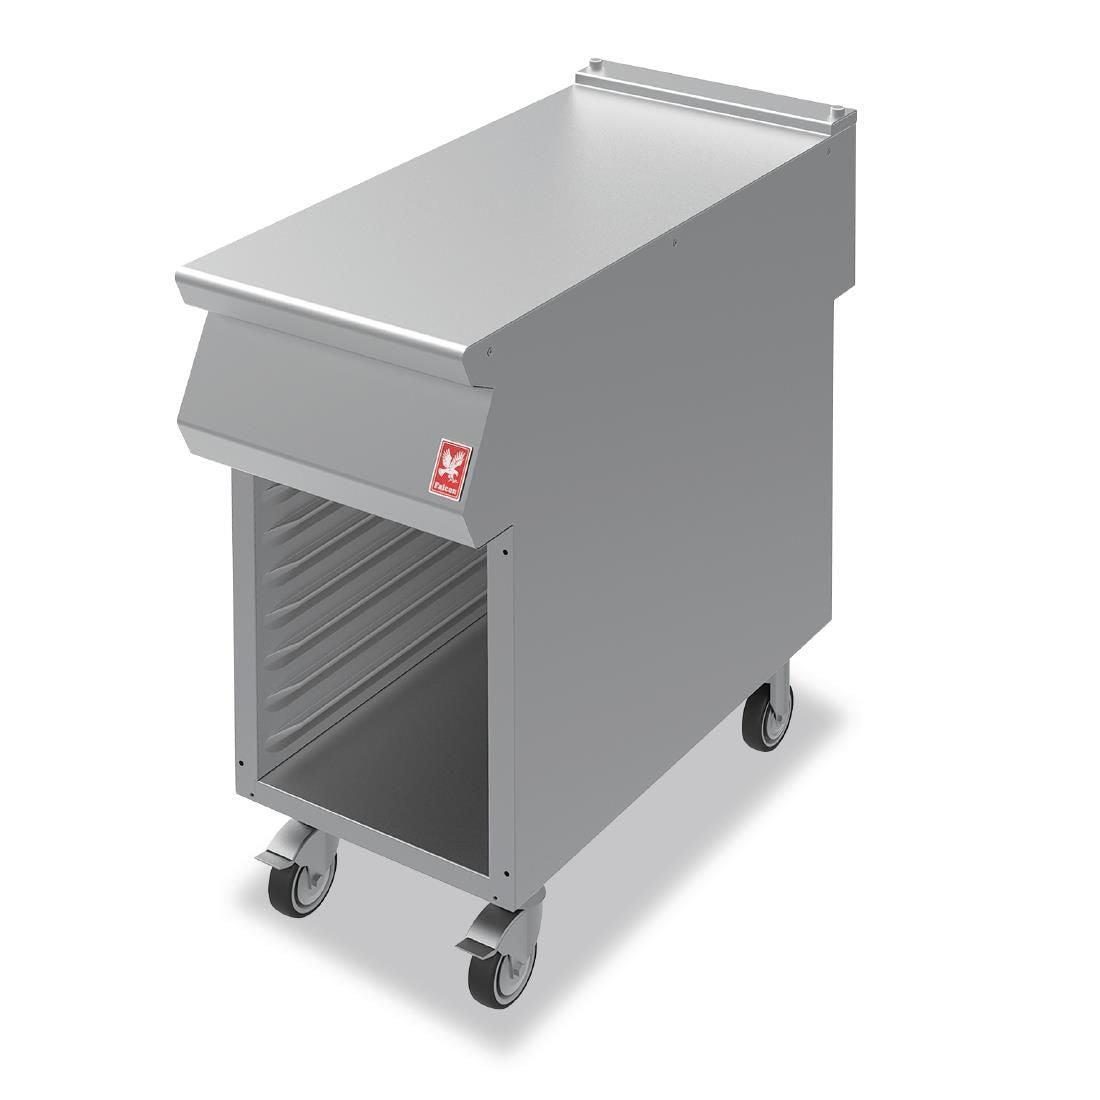 Falcon F900 Open Cabinet With Pressed Runners on Castors N941 JD Catering Equipment Solutions Ltd